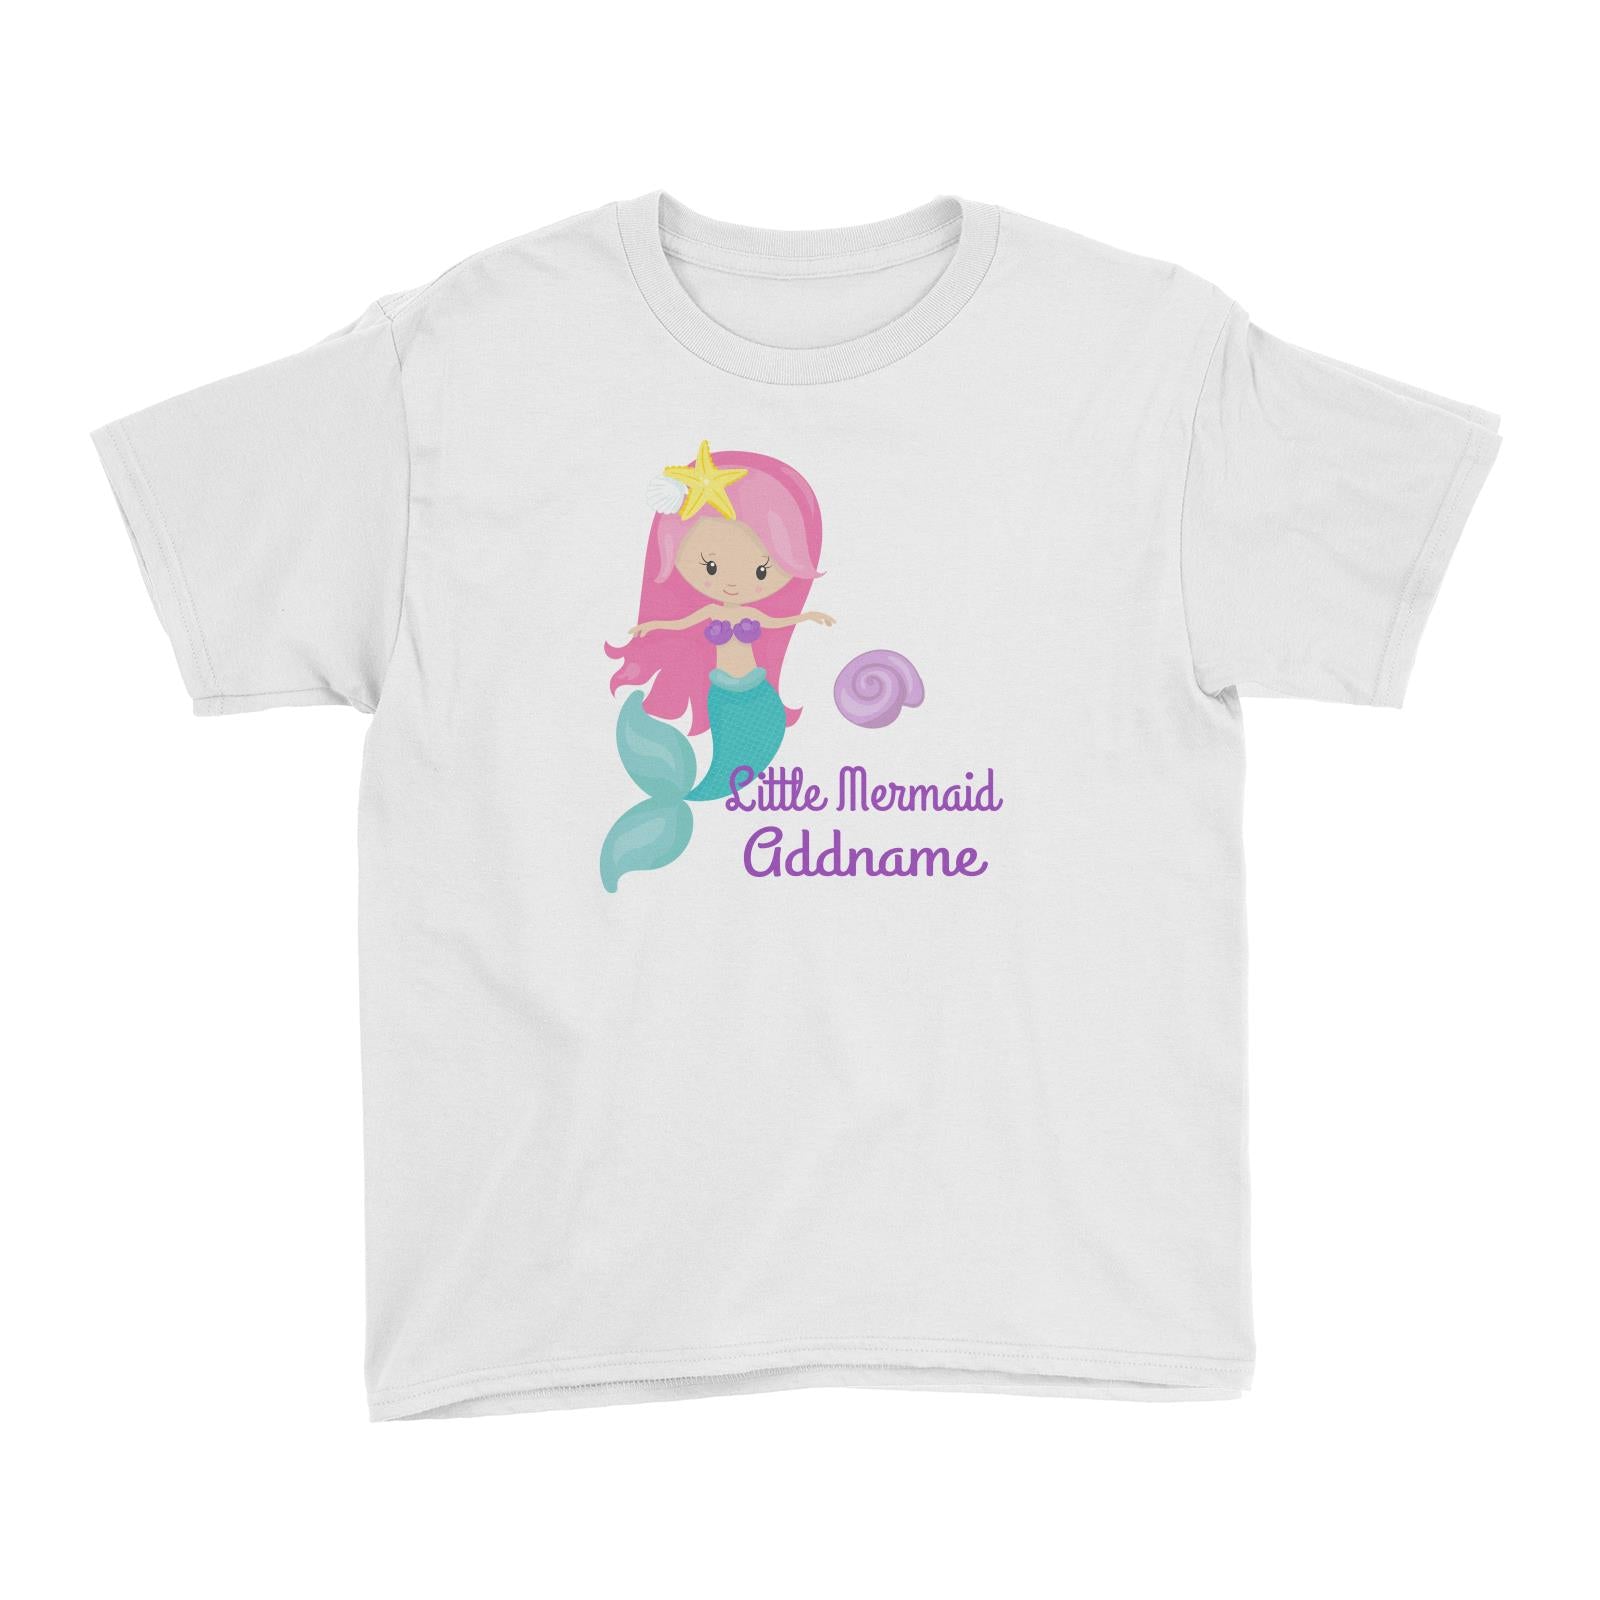 Little Mermaid Upright with Seashell Addname Kid's T-Shirt